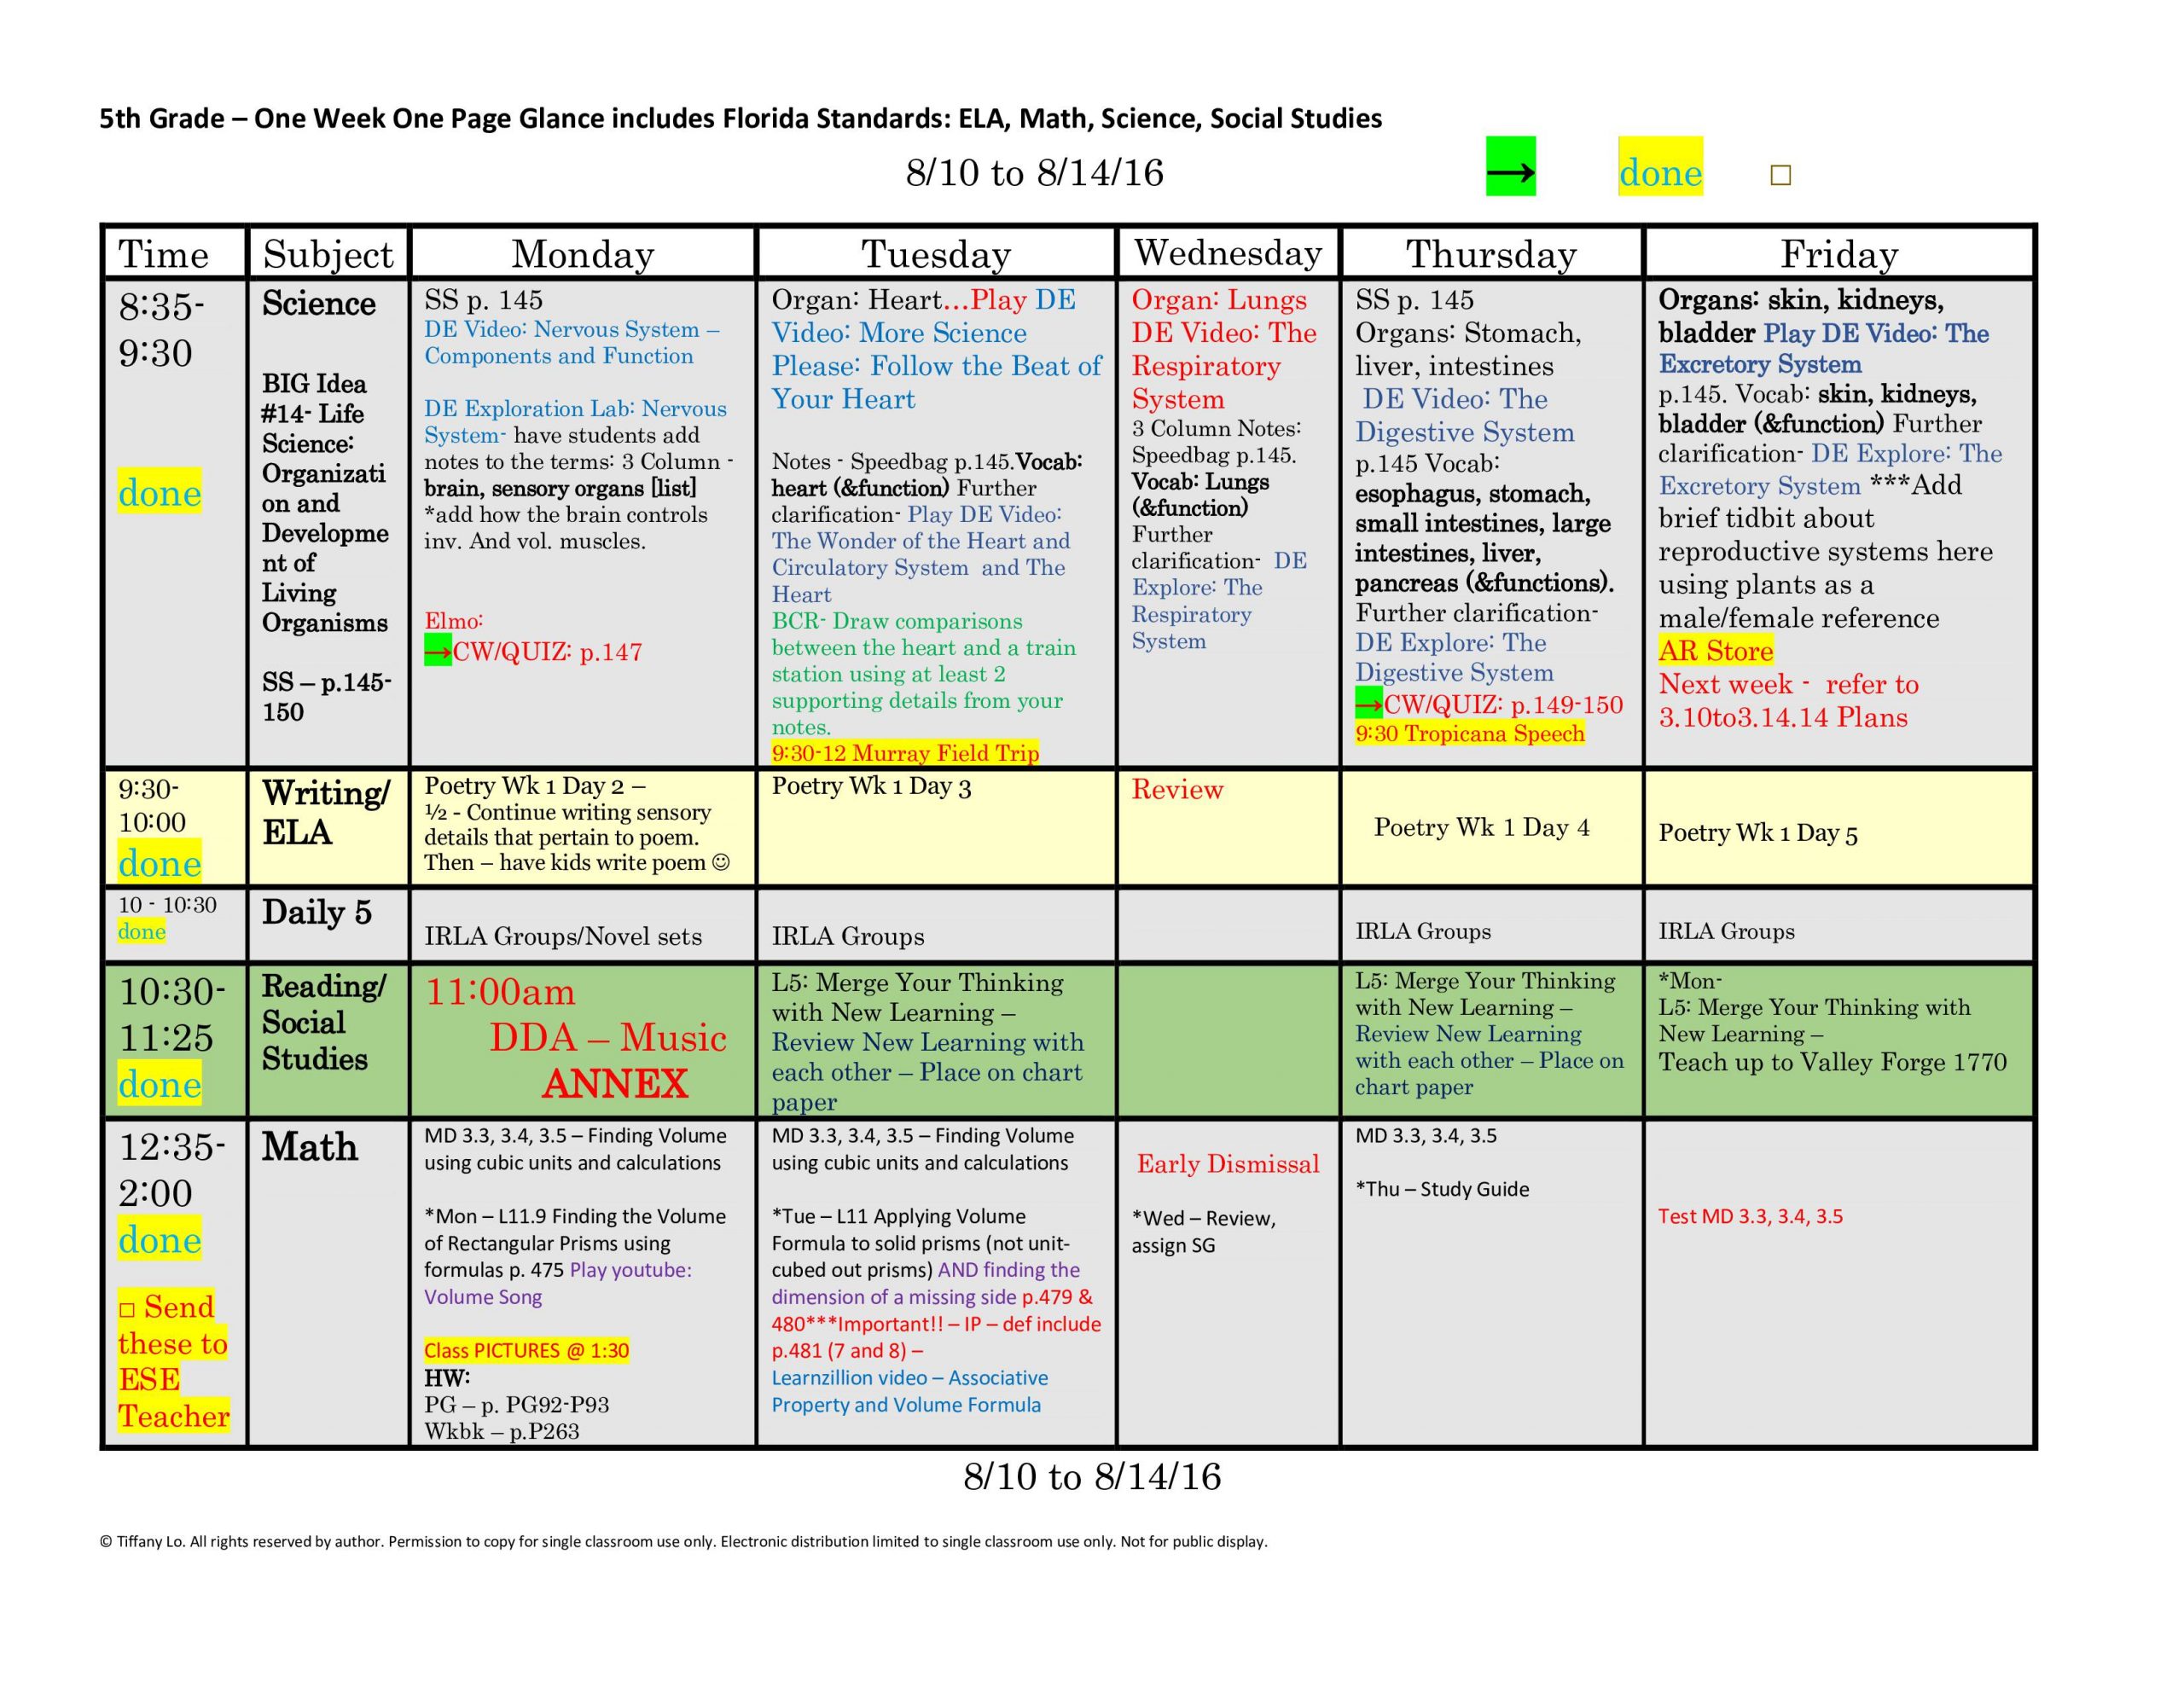 5Th Fifth Grade Florida Standards Weekly Lesson Plan Template: 1 Week 1  Glance